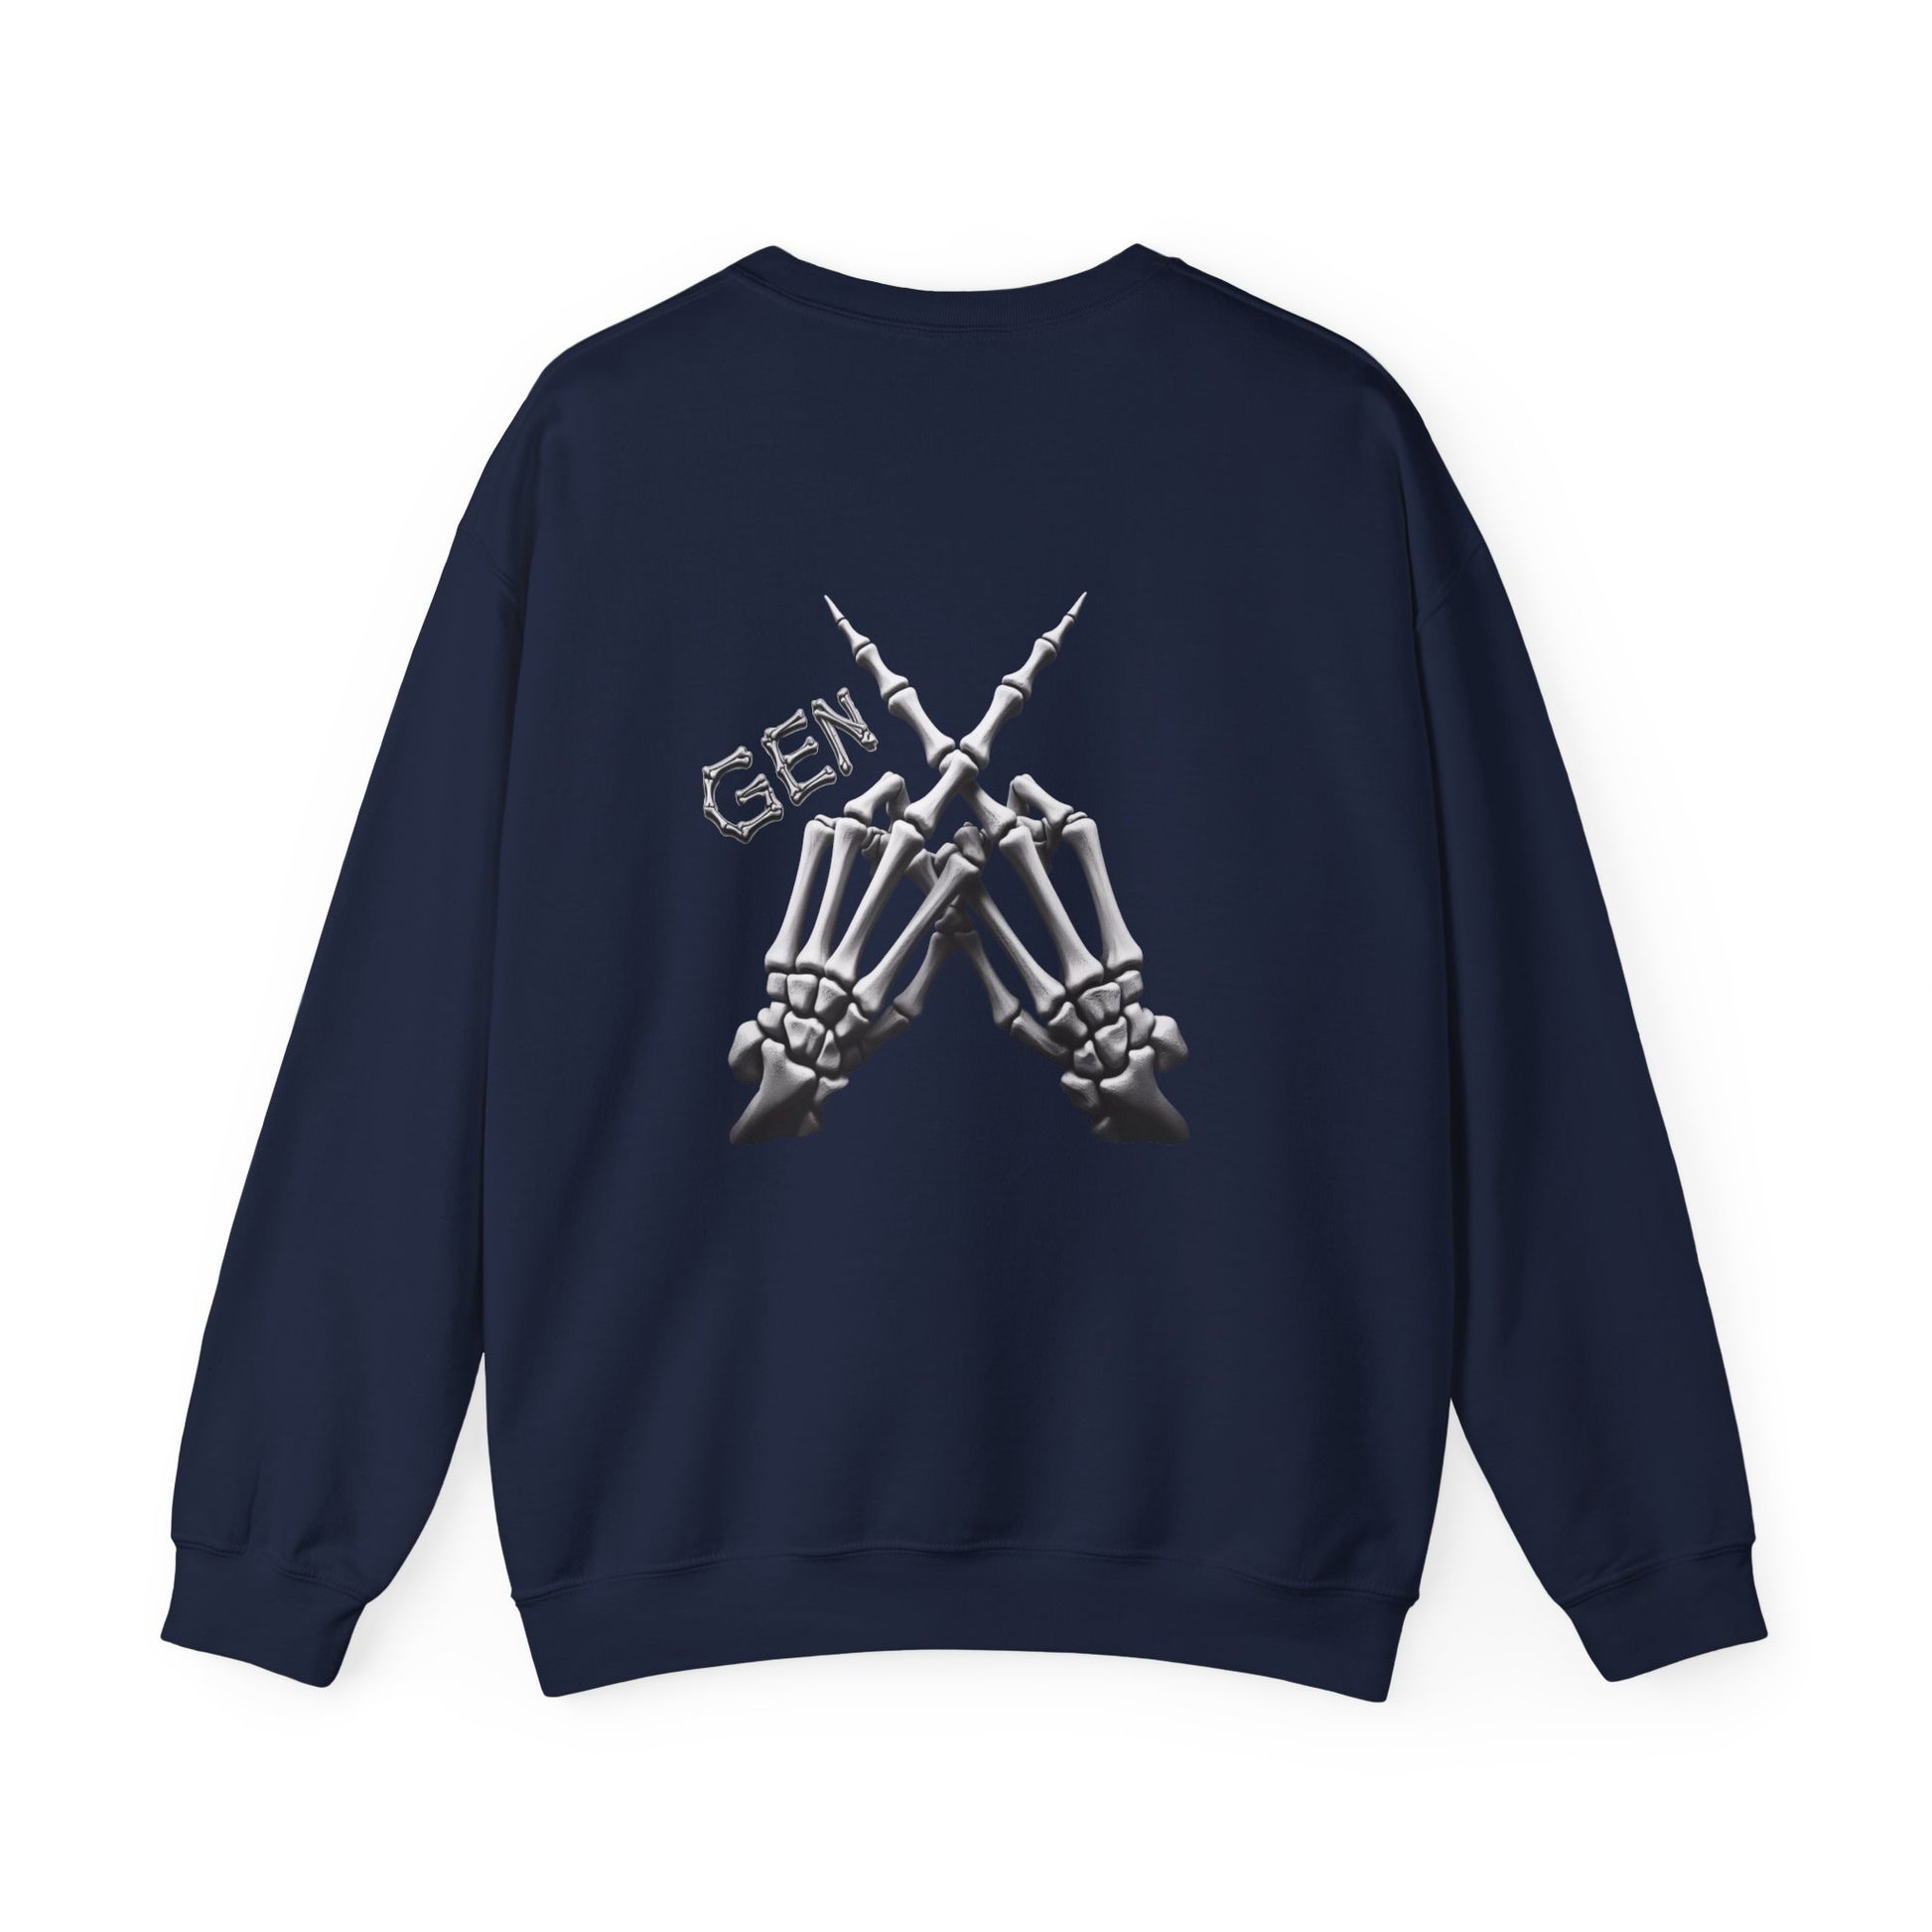 On the front, a skeletal middle finger throws shade (in the most epic way). But wait, there's more! On the back, two skeletal hands form an "X" with the fingers, declaring your place in "Gen X Forever". “Bold Street Style: Gen X Forever Apparel